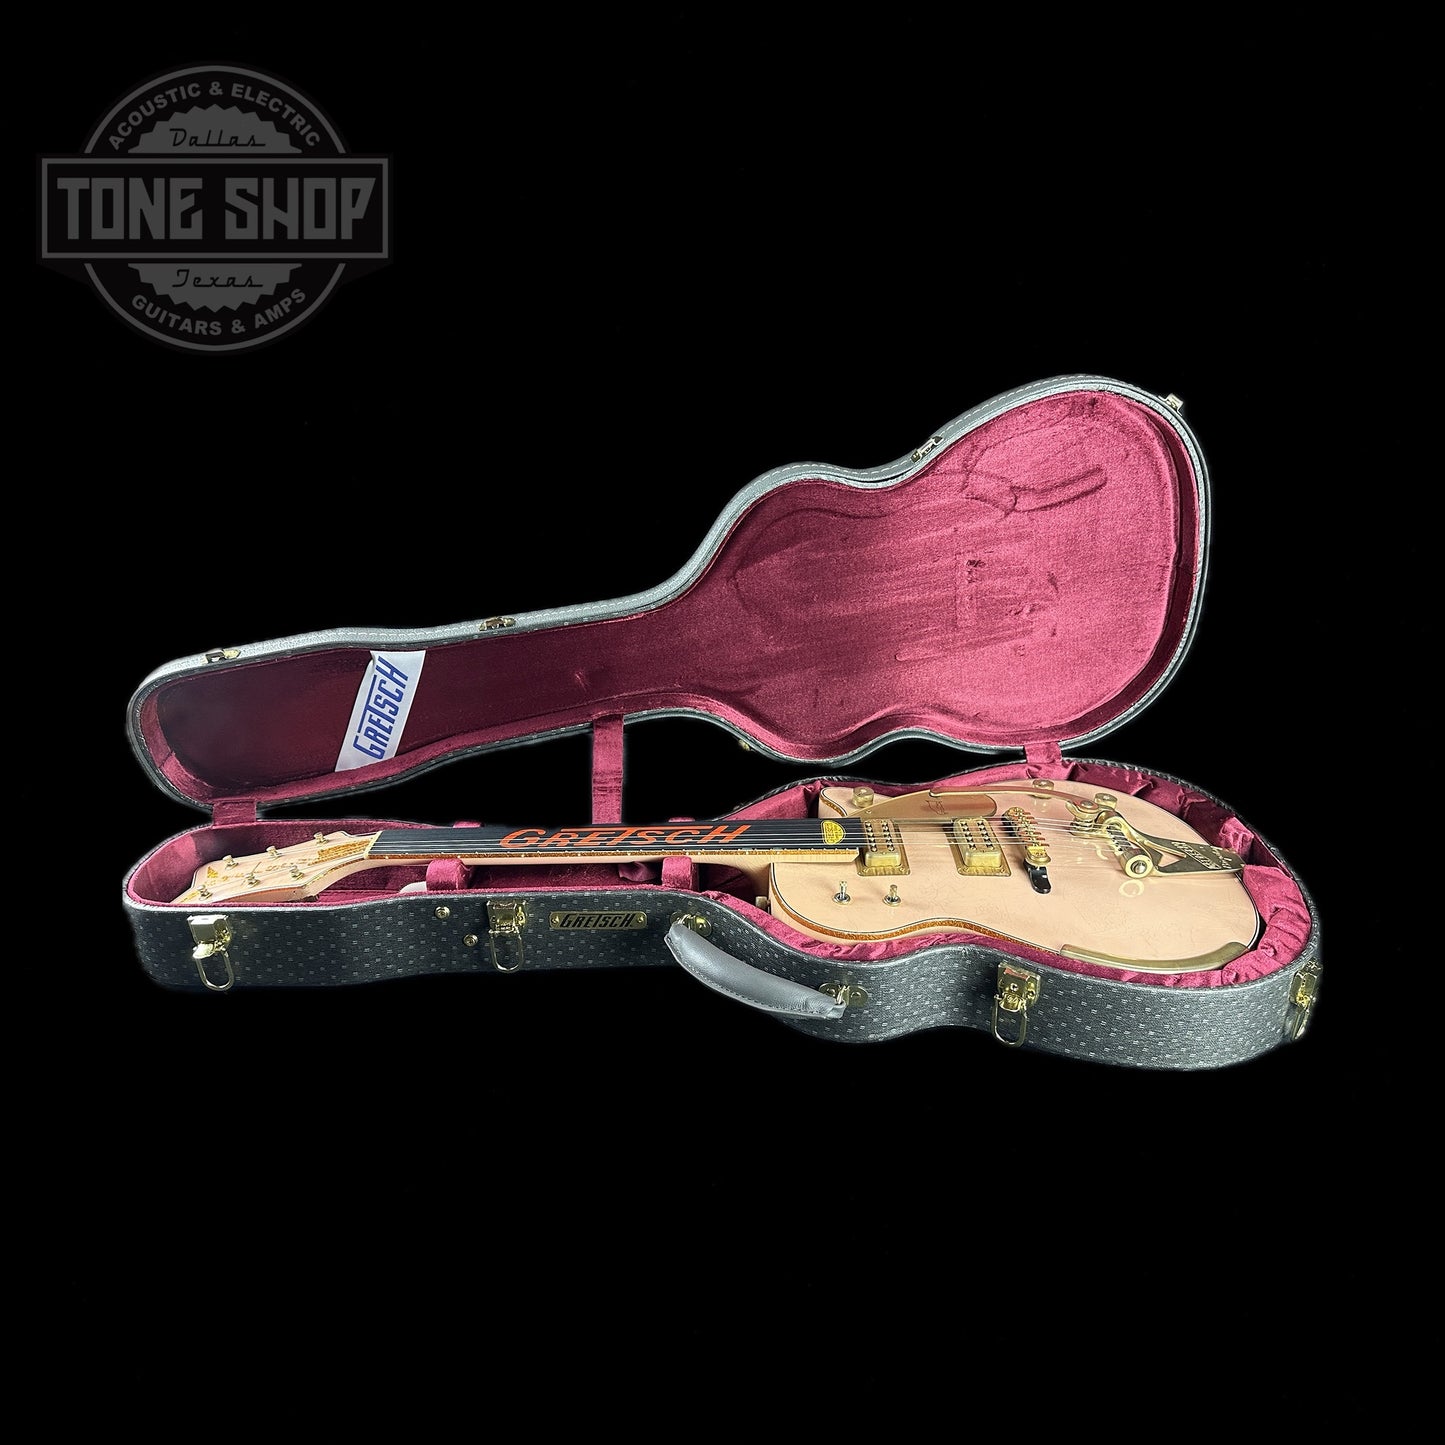 Gretsch Custom Shop G6134-59 Penguin Relic Shell Pink Masterbuilt By Gonzalo Madrigal in case.